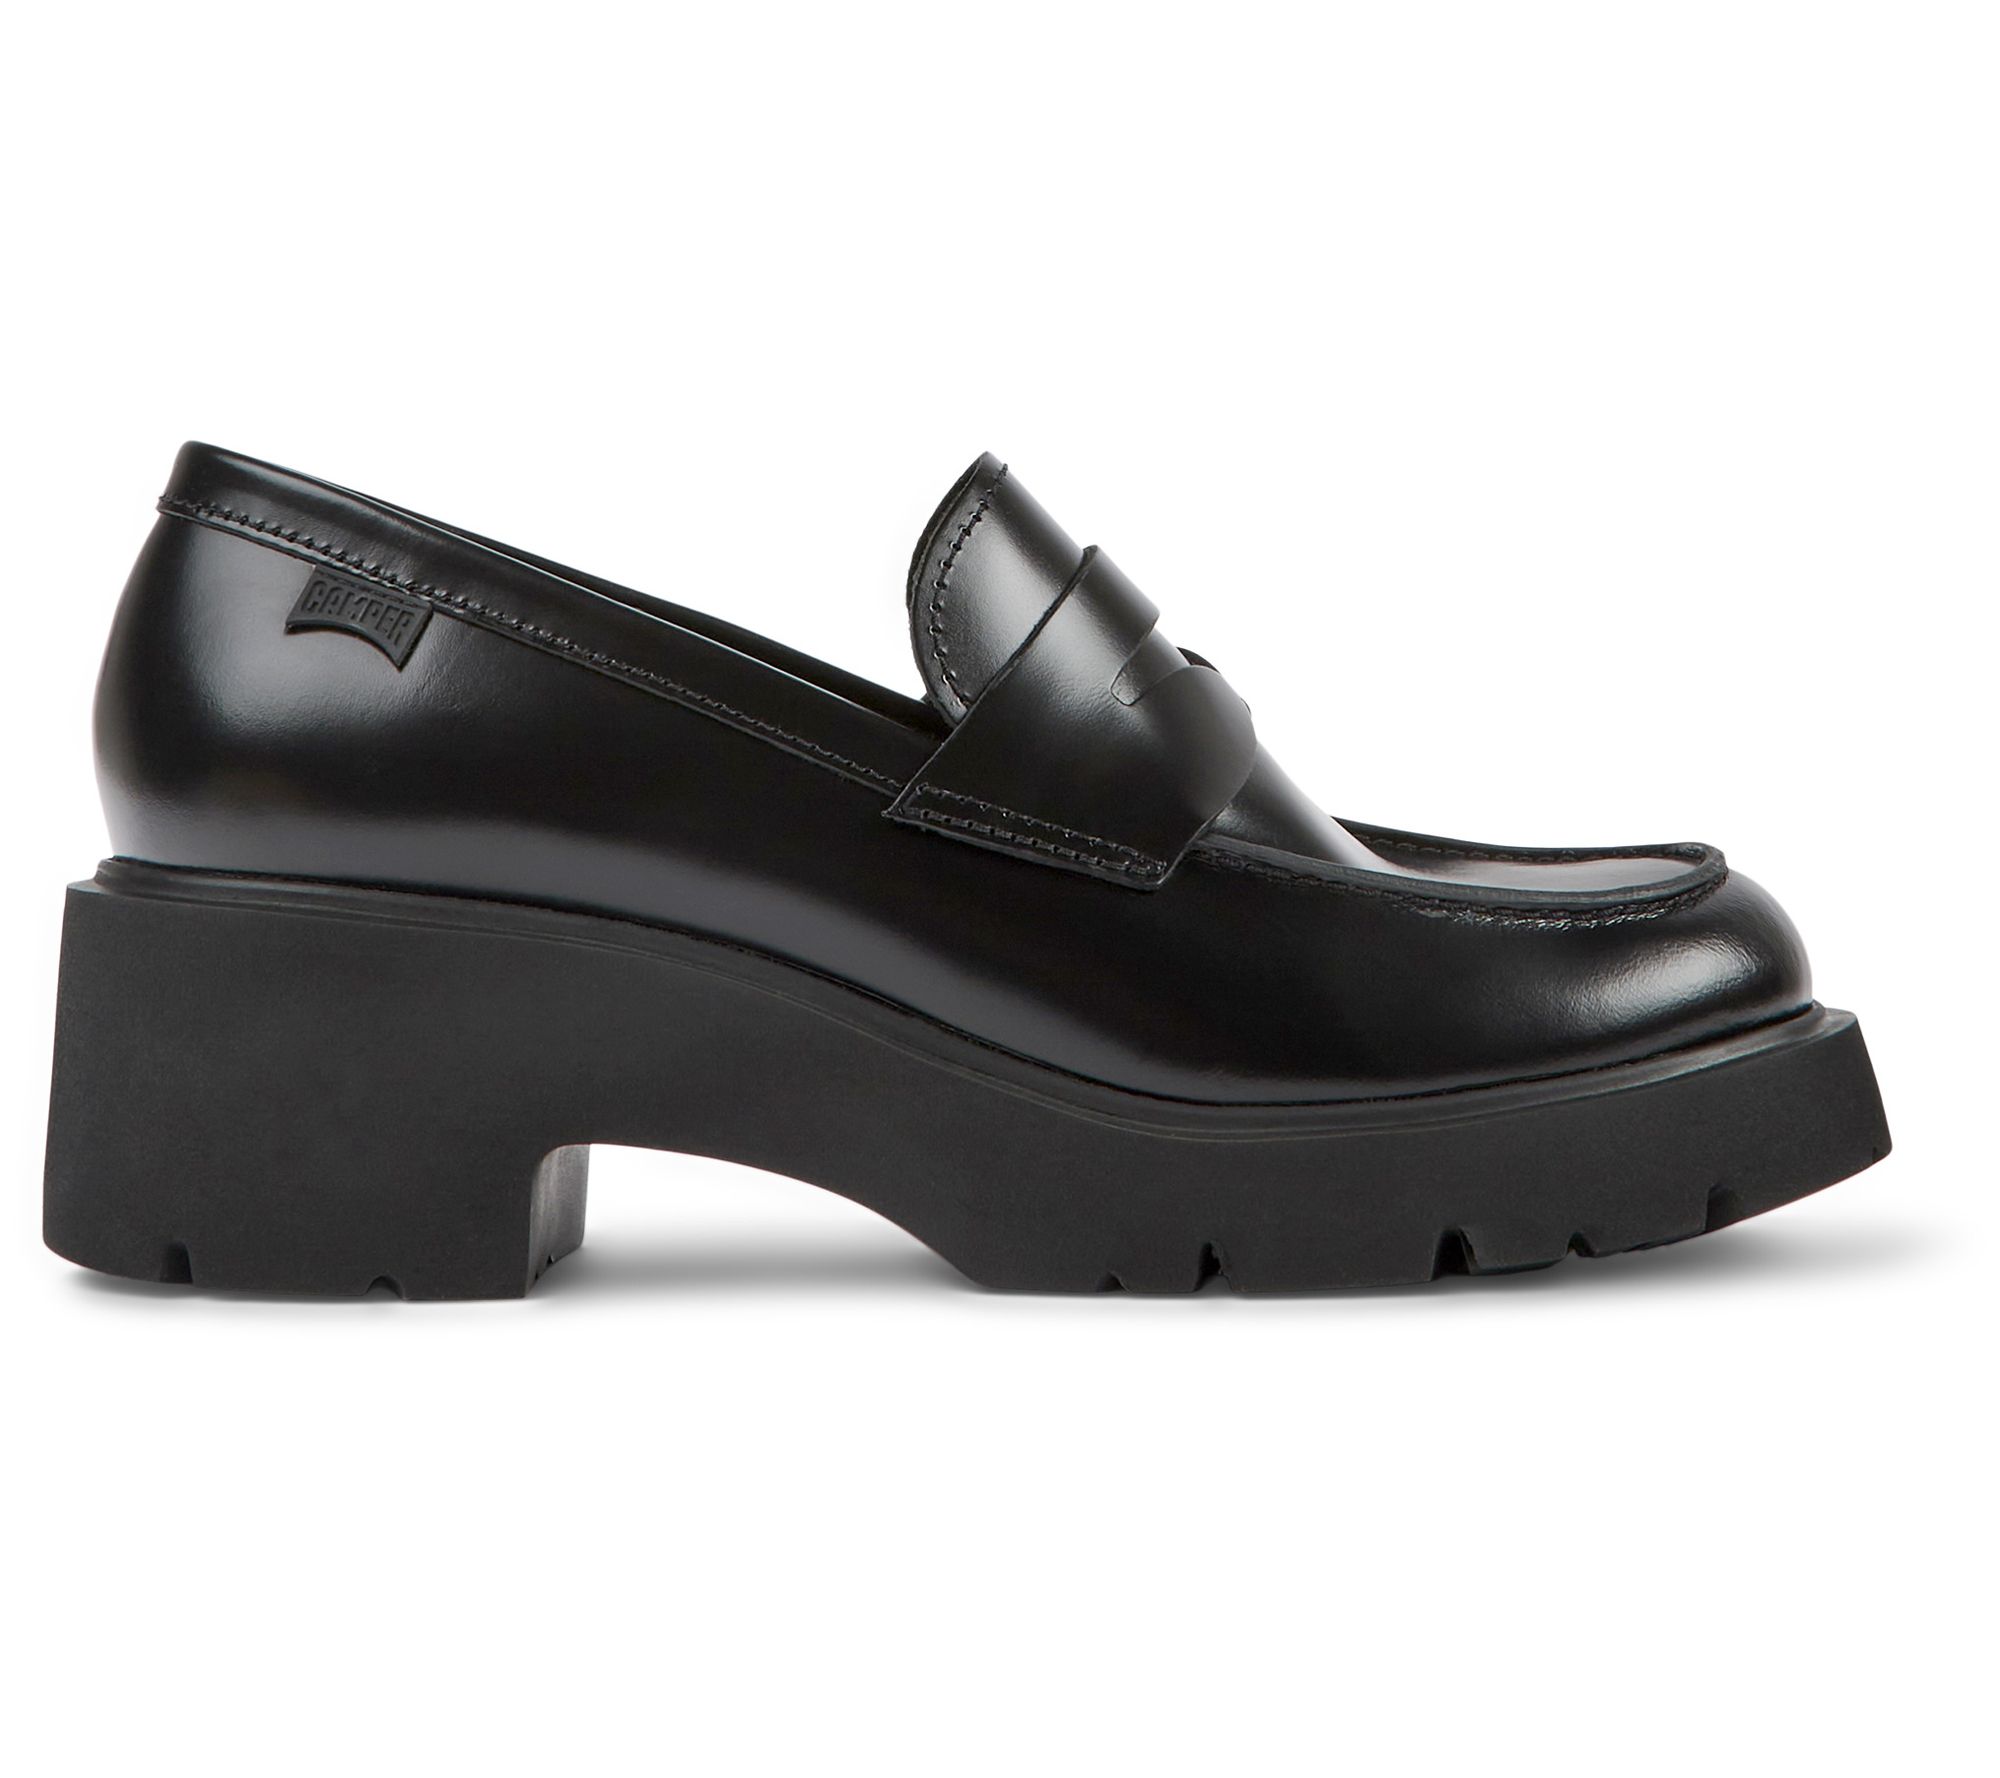 Camper Women's Heeled Leather Loafers - Milah - QVC.com